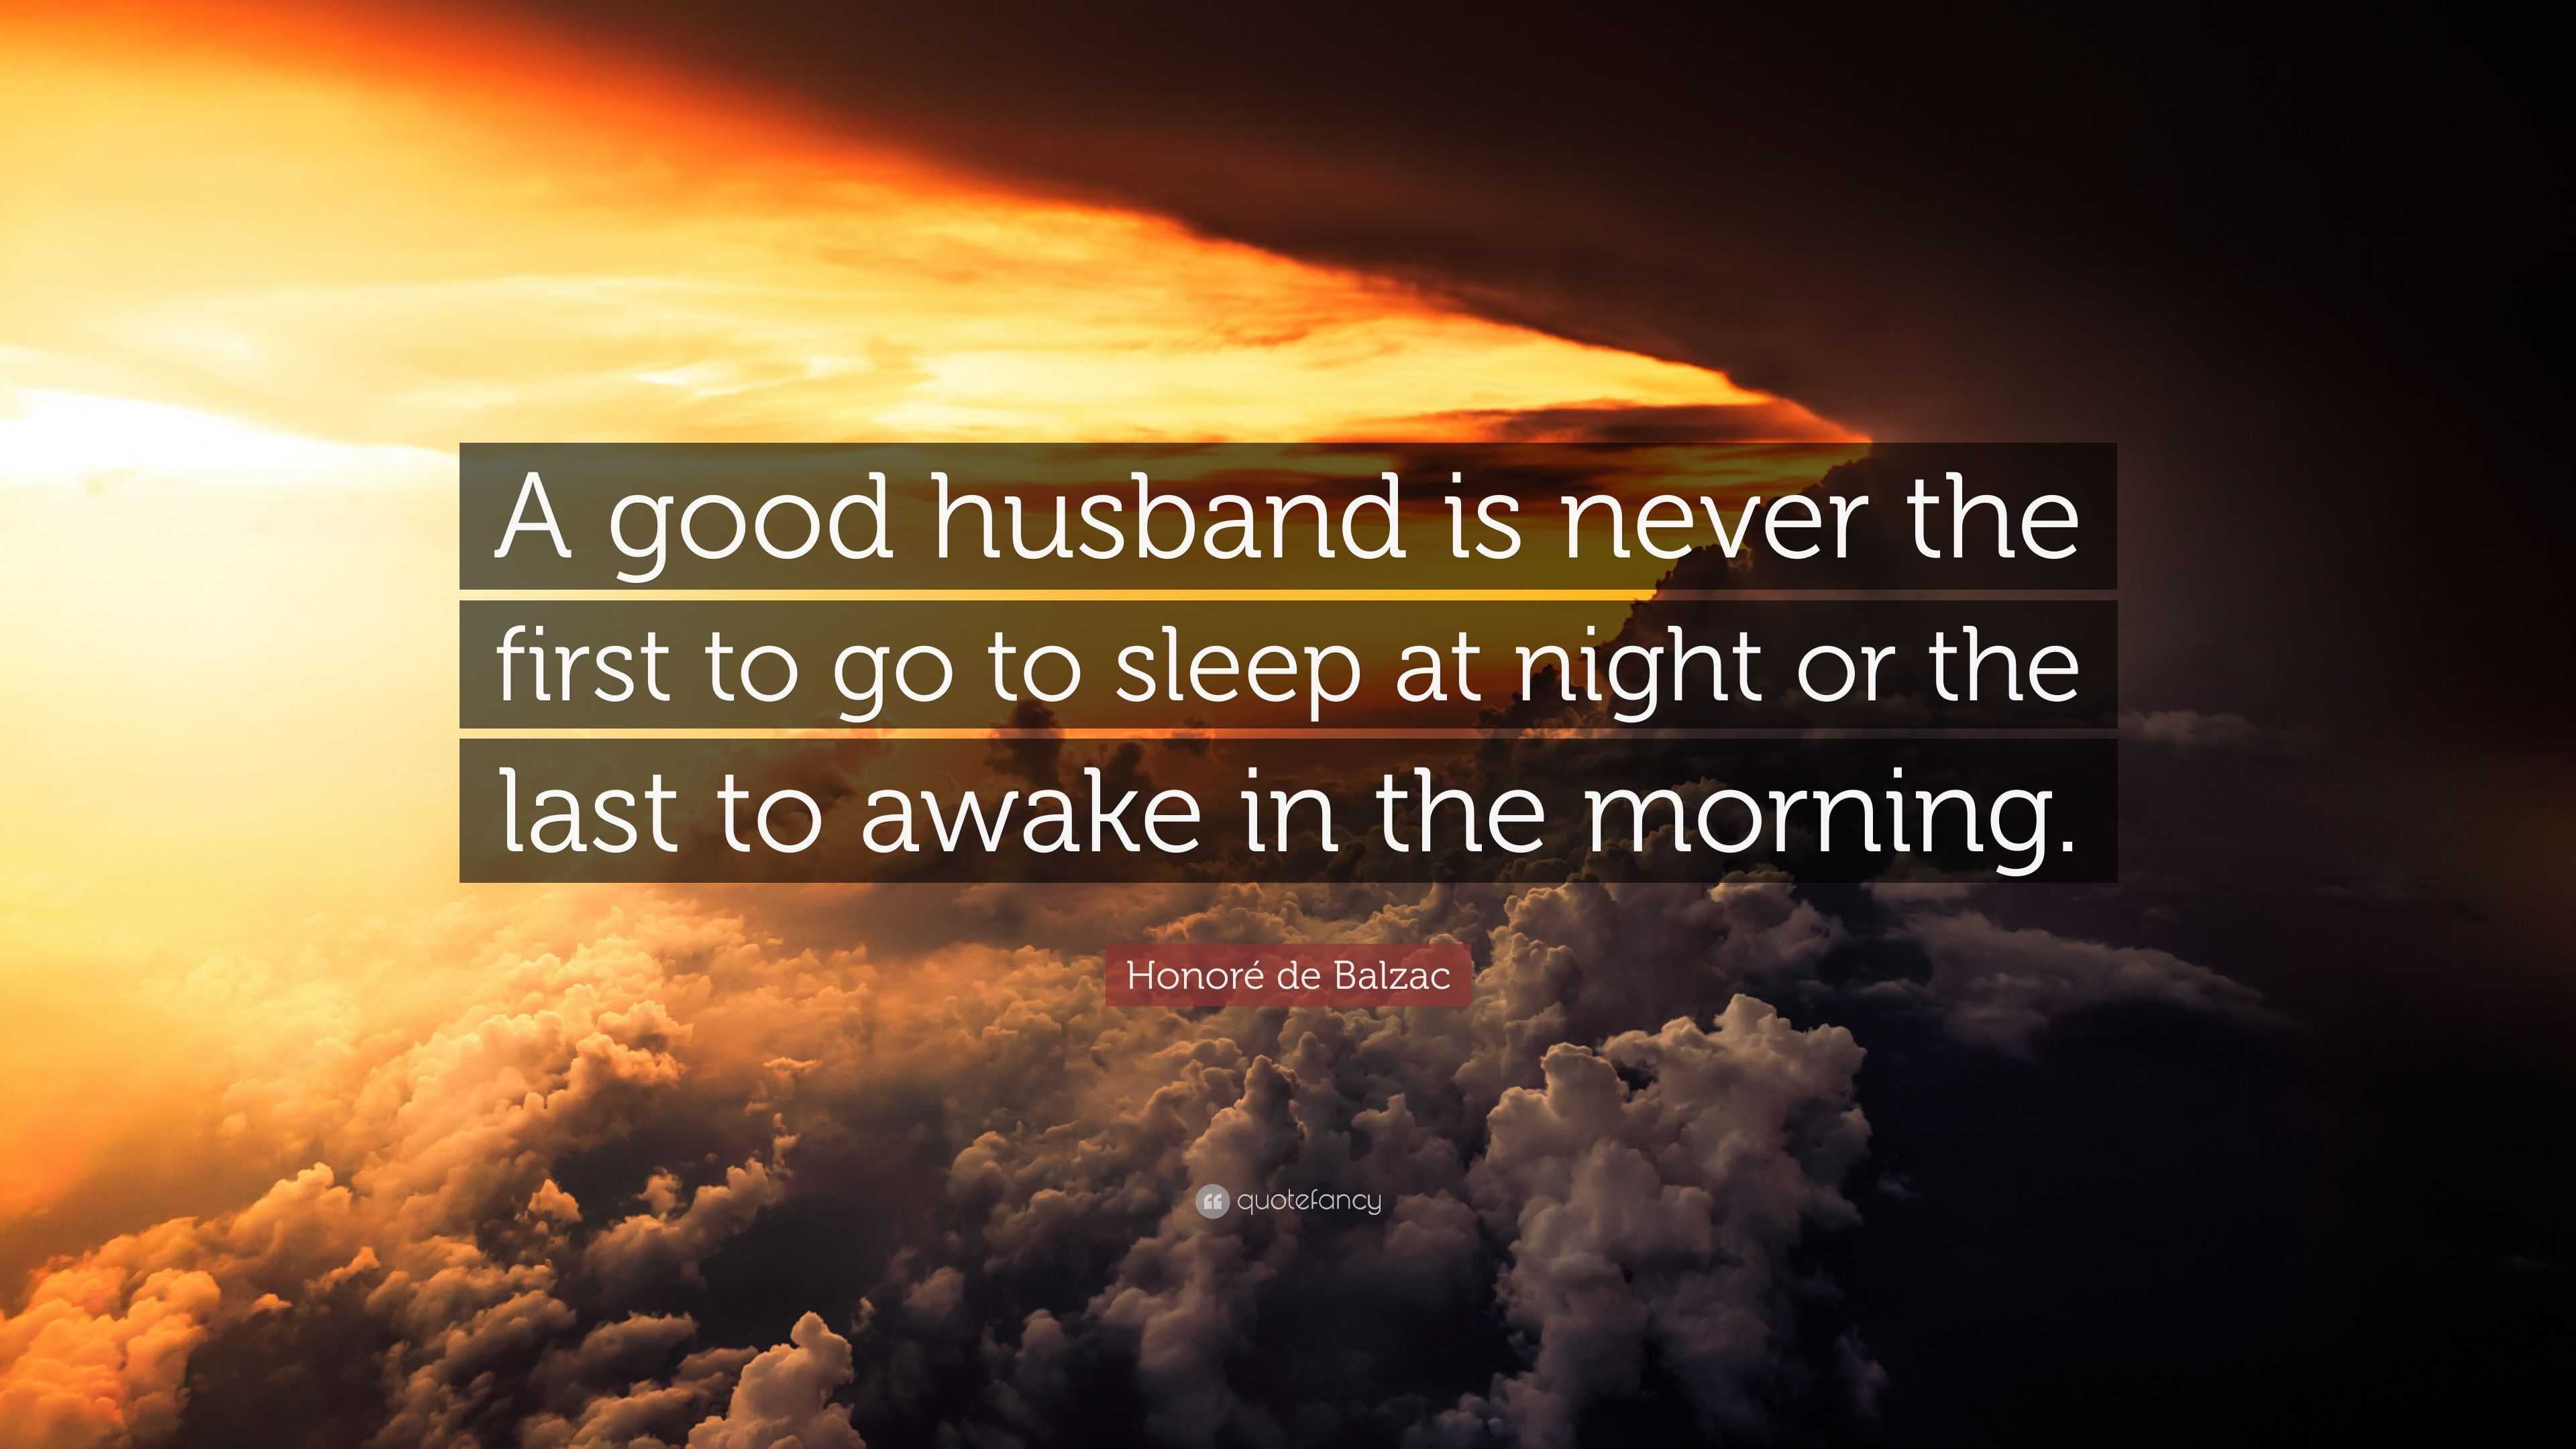 Honoré de Balzac Quote: "A good husband is never the first ...